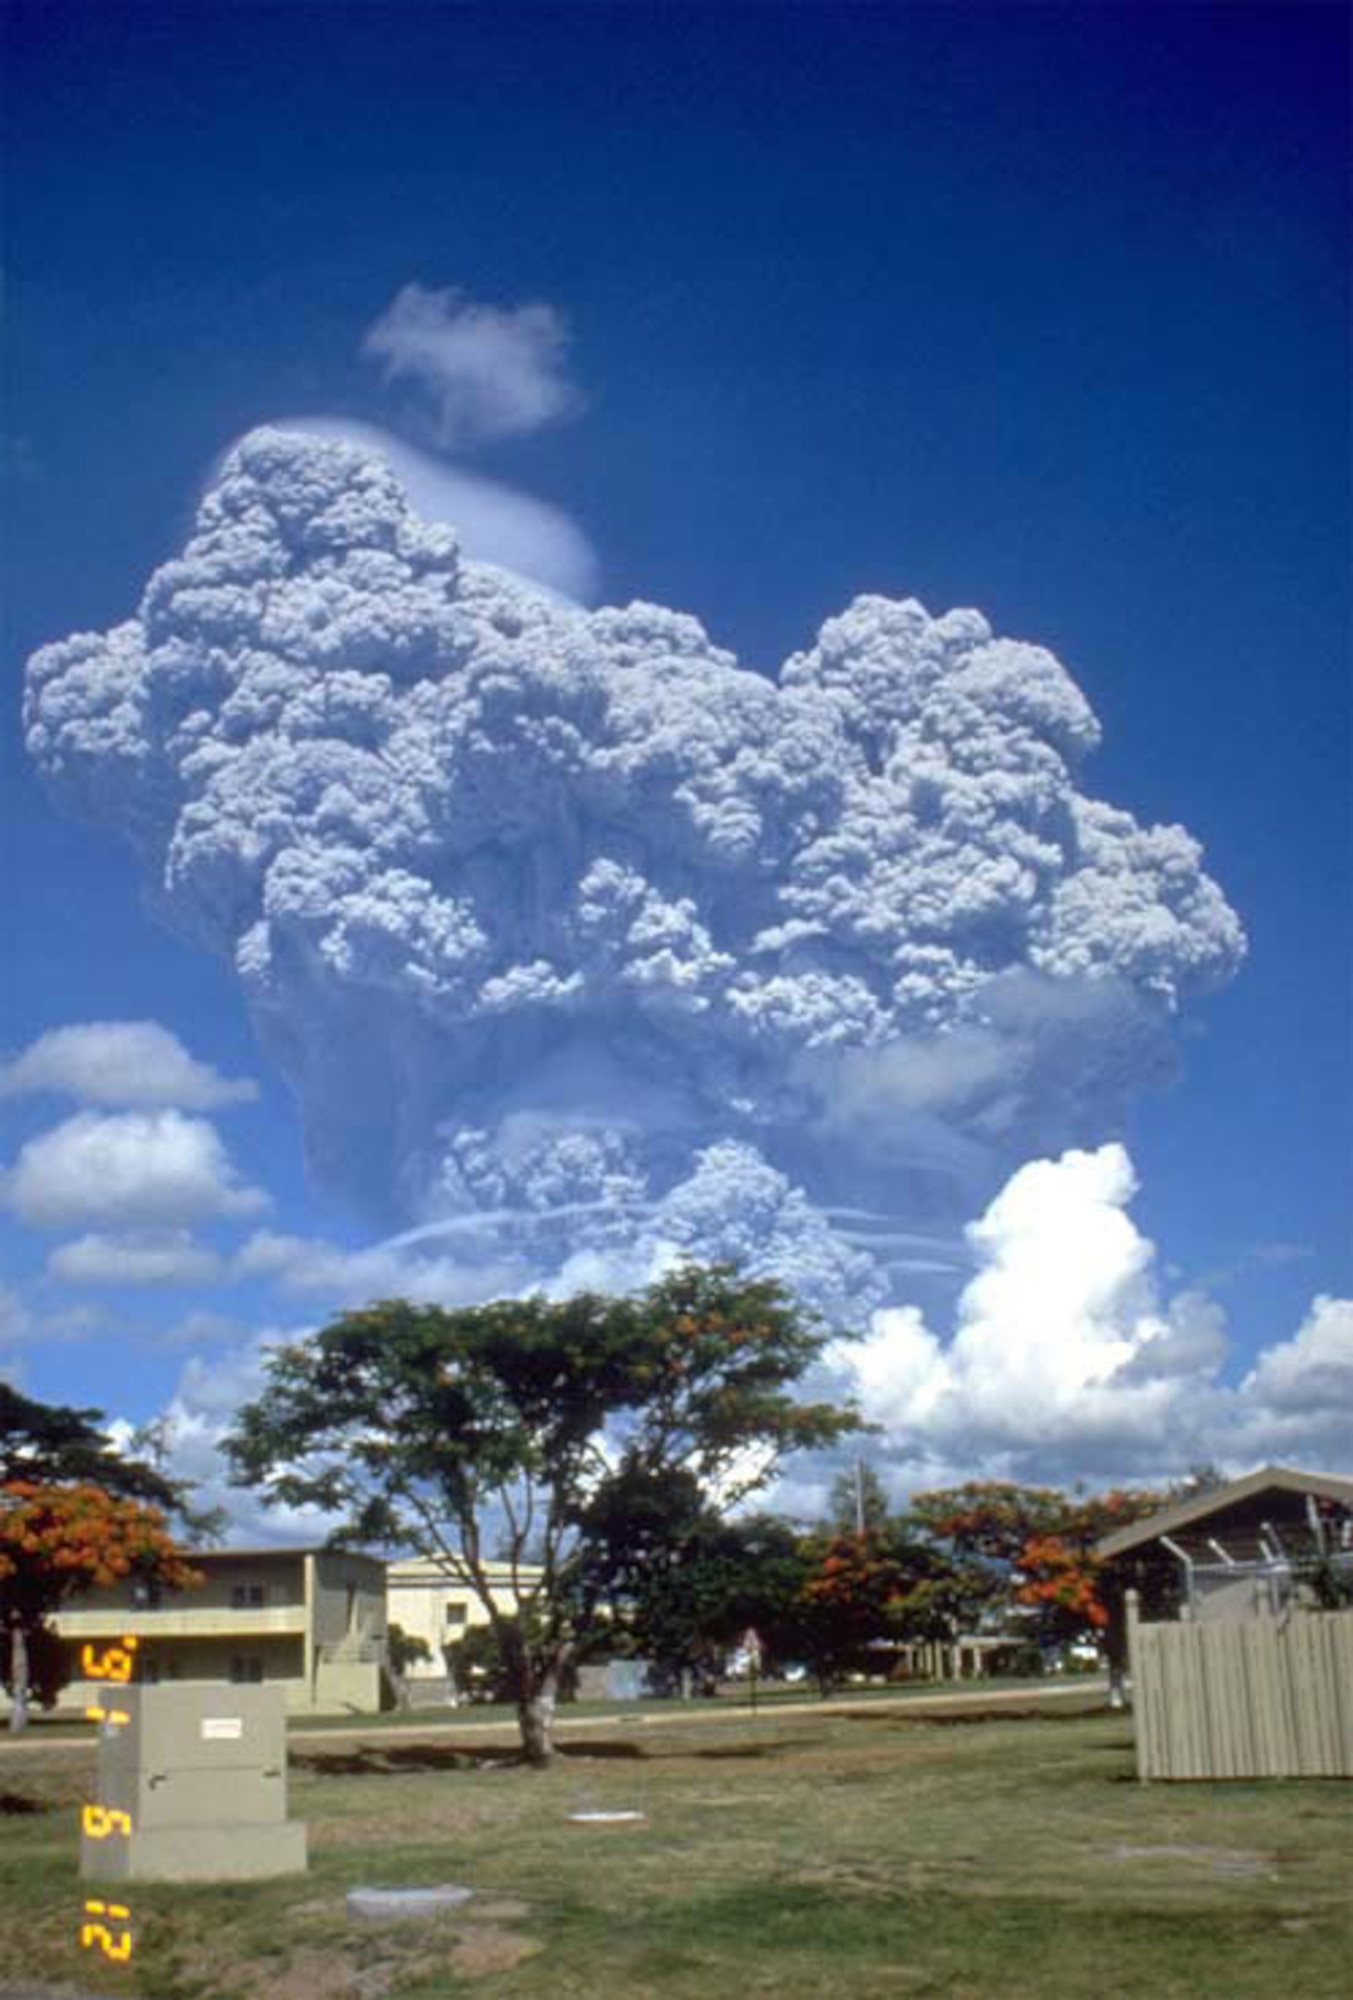 Ash plumes from the volcano, Mount Pinatubo, that forced Philippine evacuations including Clark Air Force Base. (Courtesy photo)